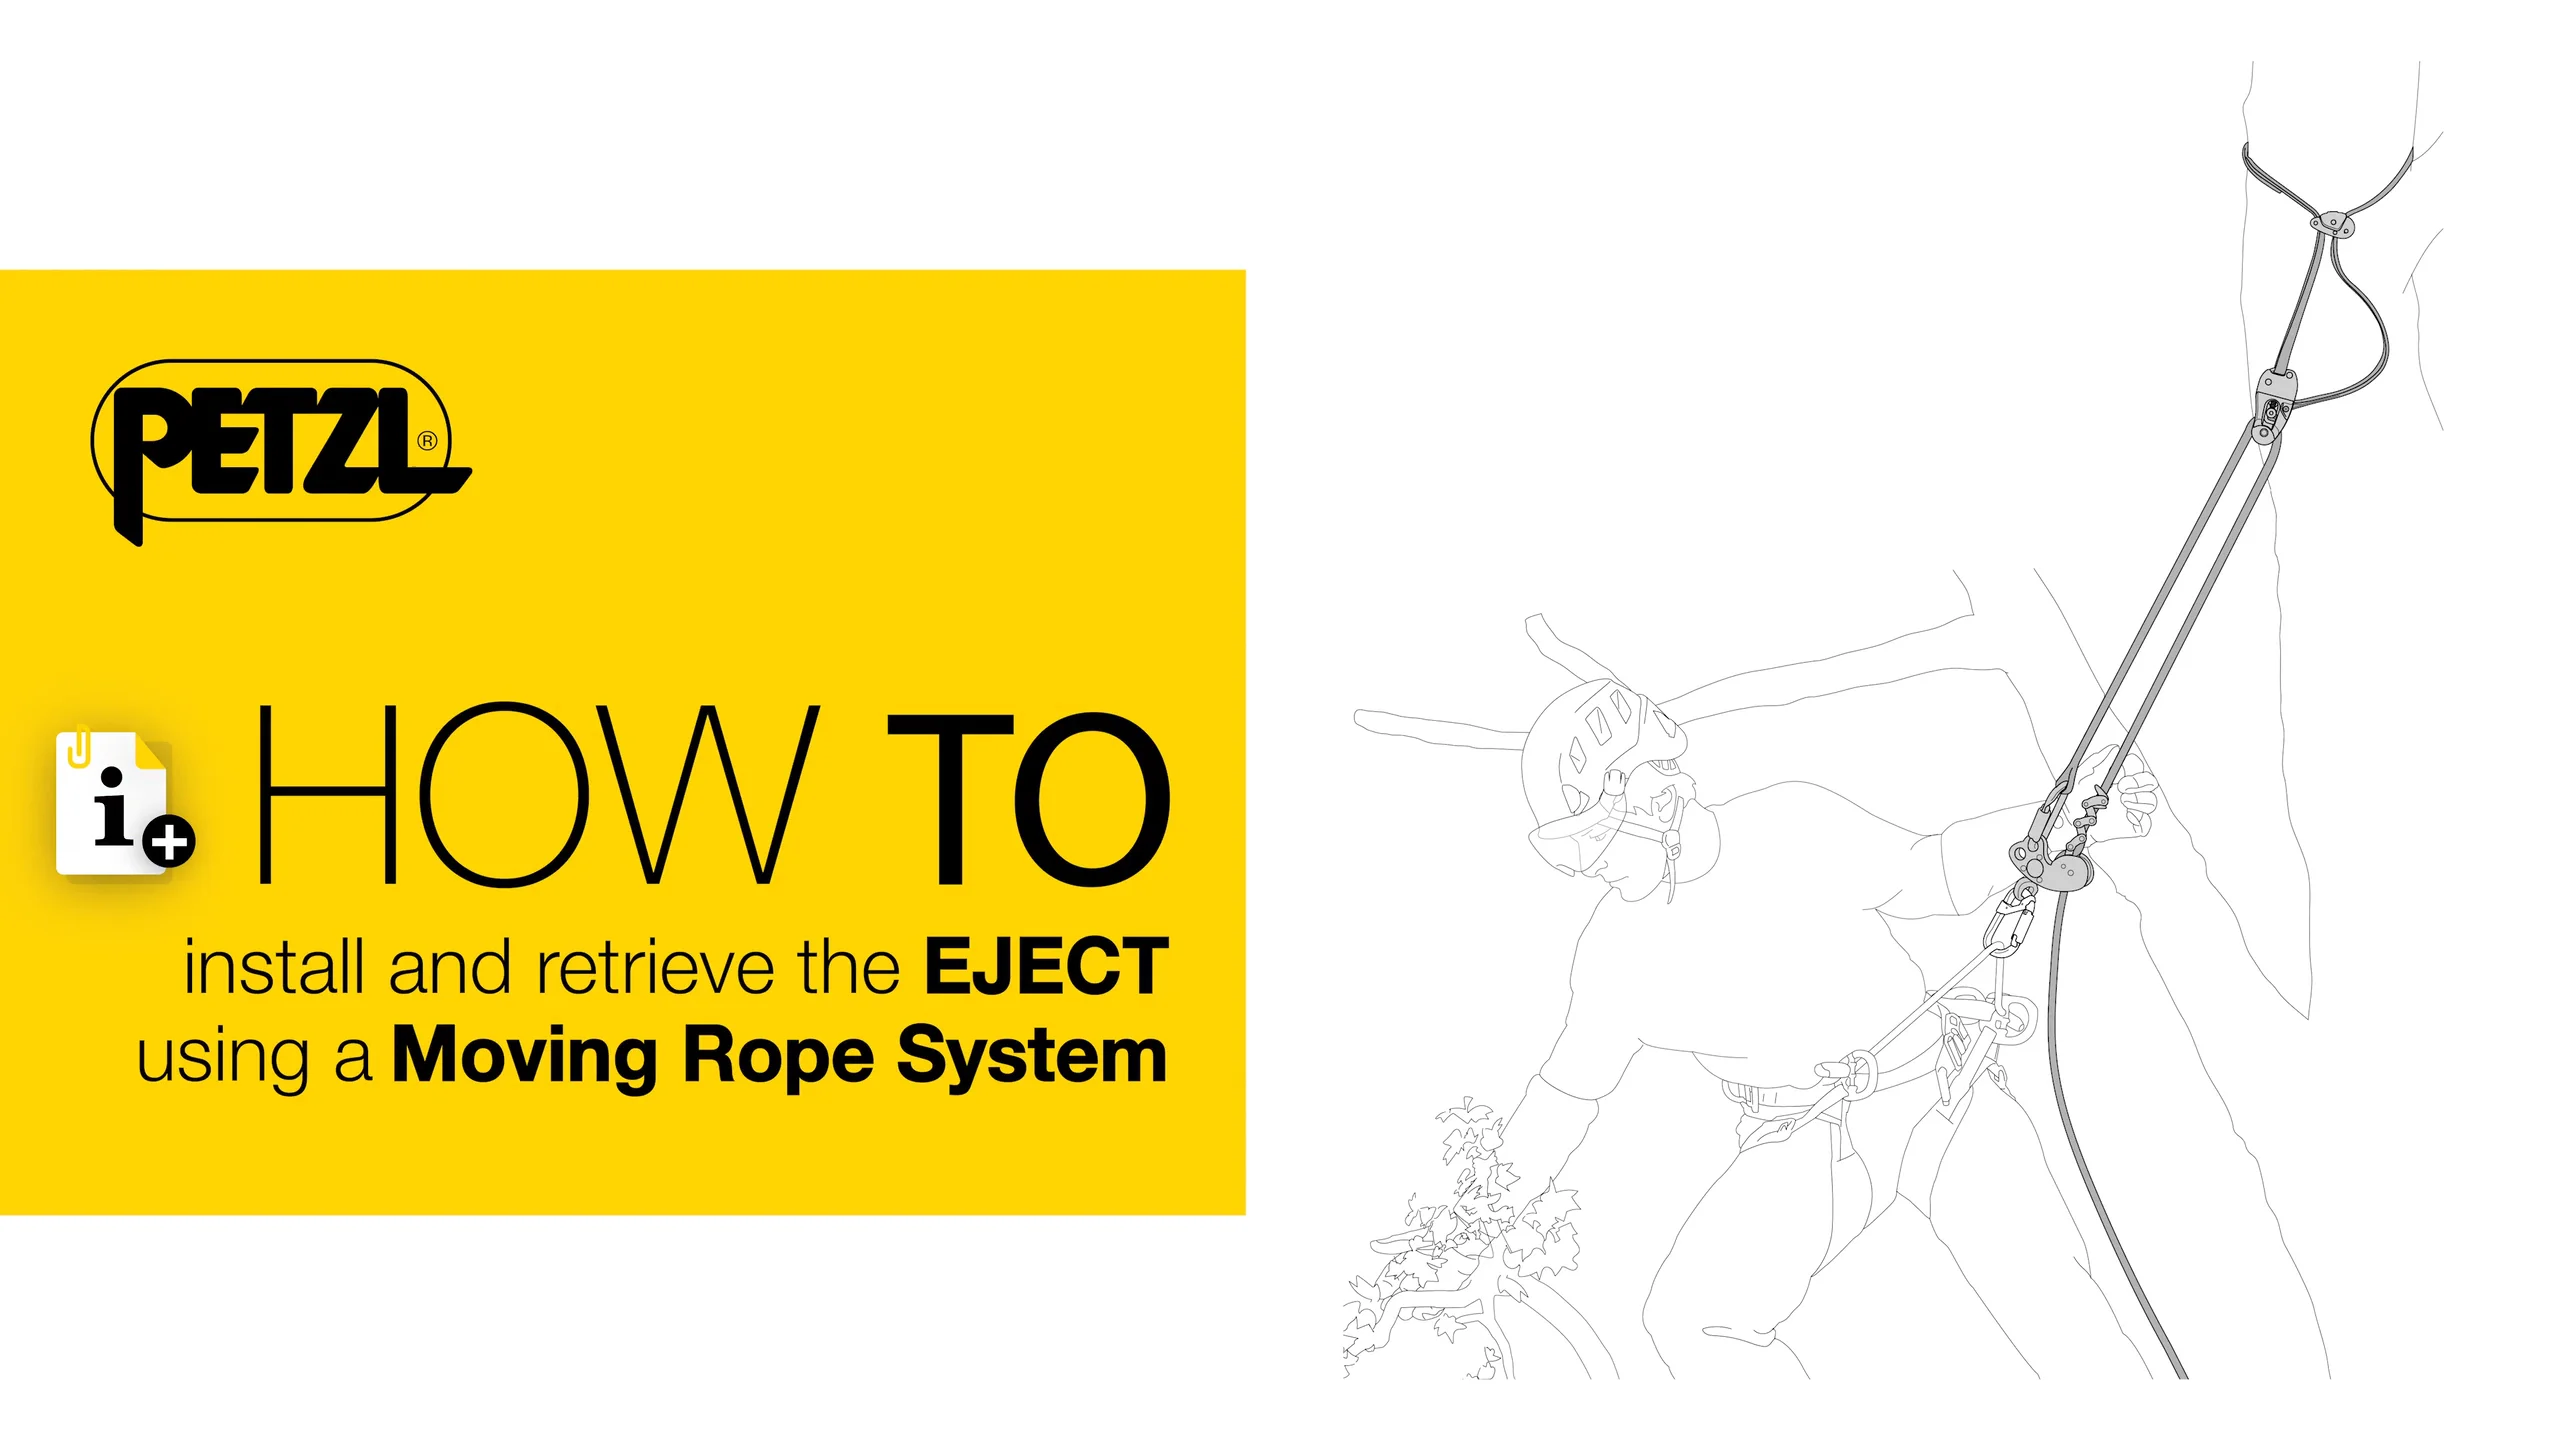 How To - Install and retrieve the EJECT using a Moving Rope System